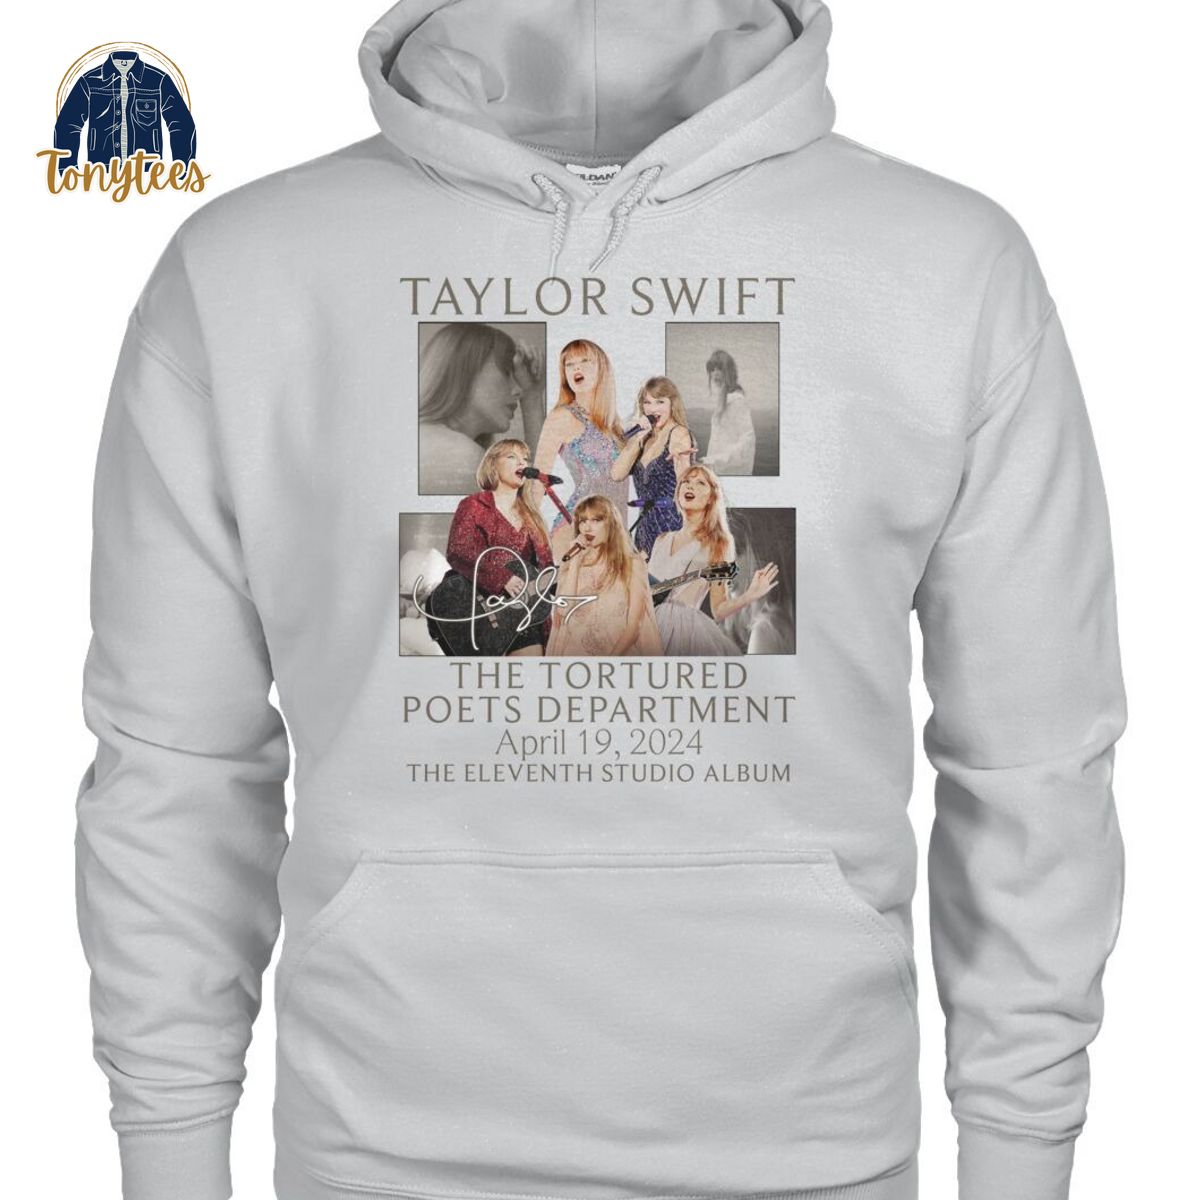 Taylor Swift The Eleventh Studio Album The Tortured Poets Department Shirt